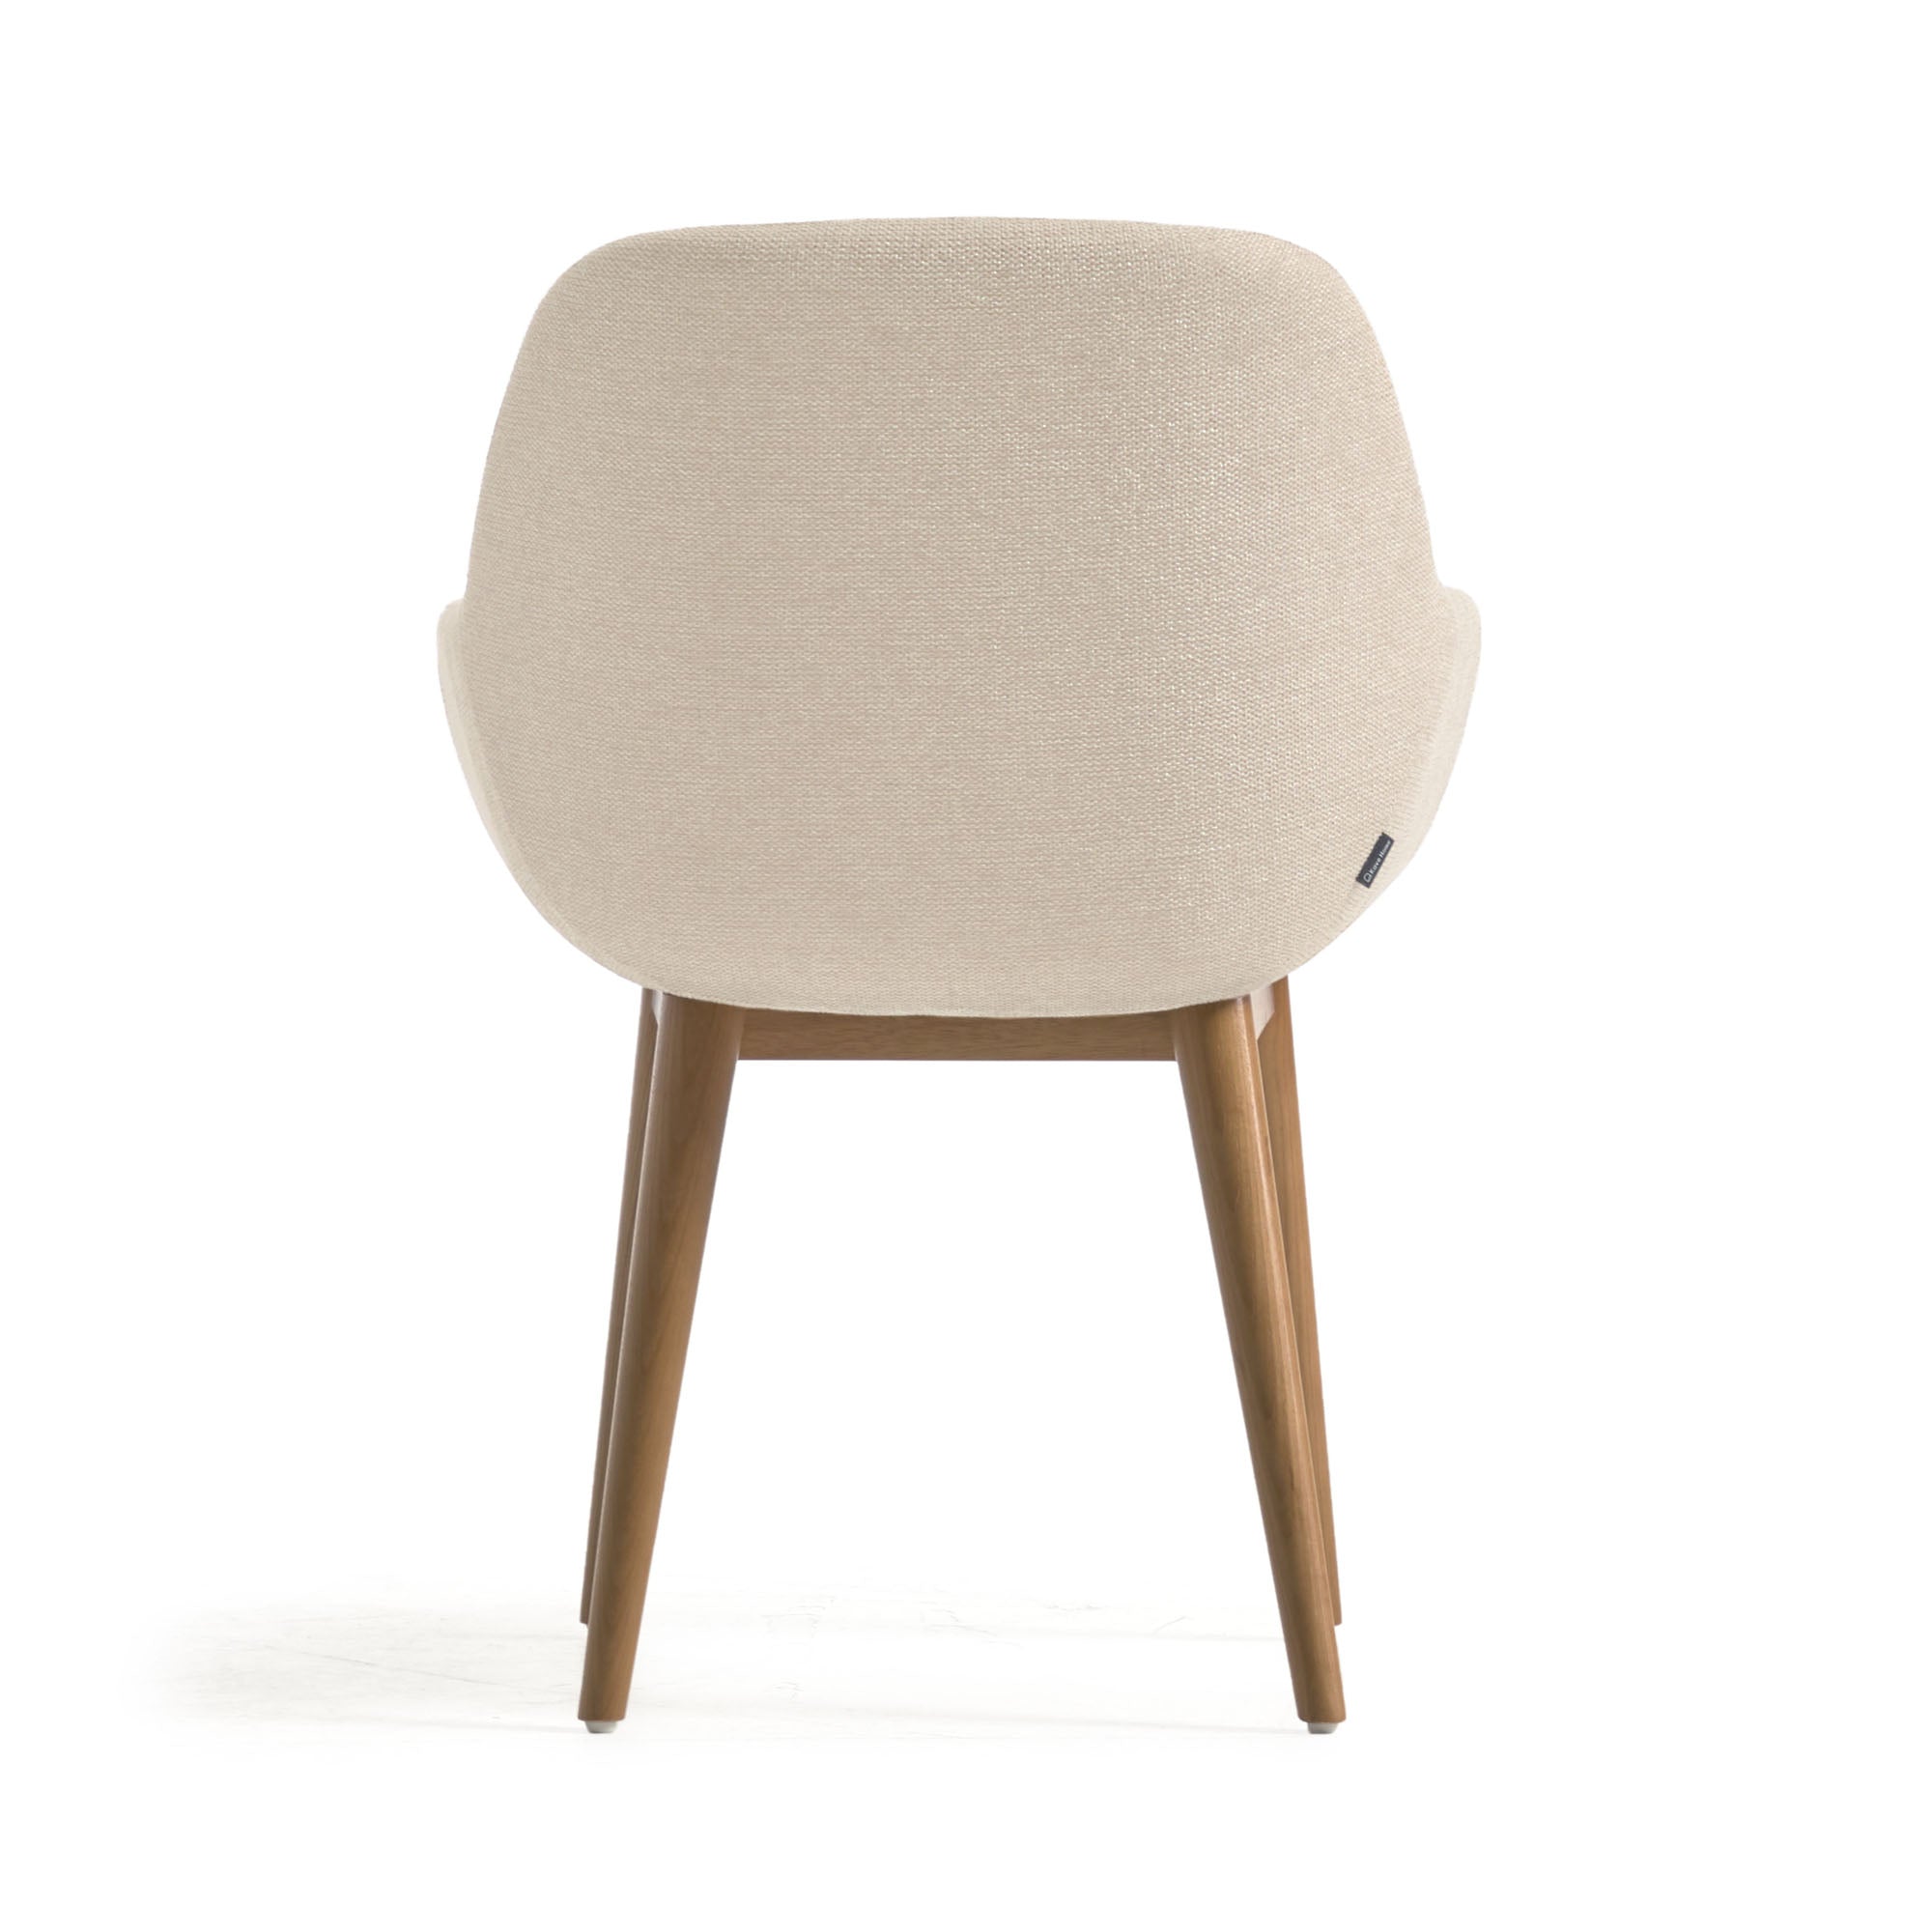 Konna chair in beige with solid ash wood legs in a dark finish